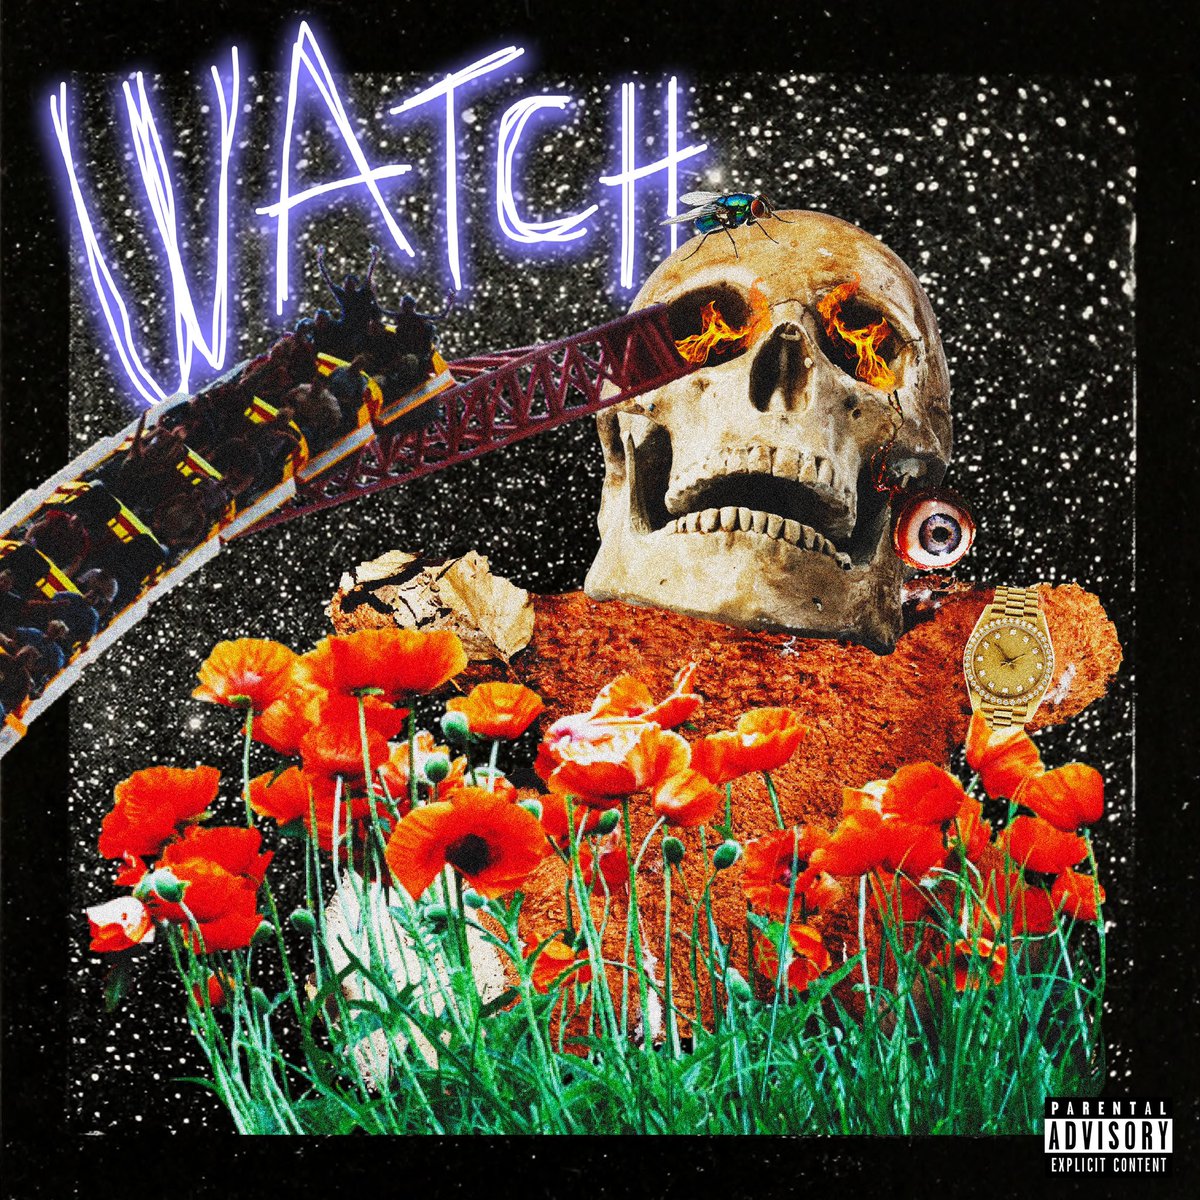 The last time Travis Scott dropped a single before an album release…

“Watch” featuring Lil Uzi Vert & Kanye West (prod. Pi’erre Bourne) https://t.co/umGdceY3oq